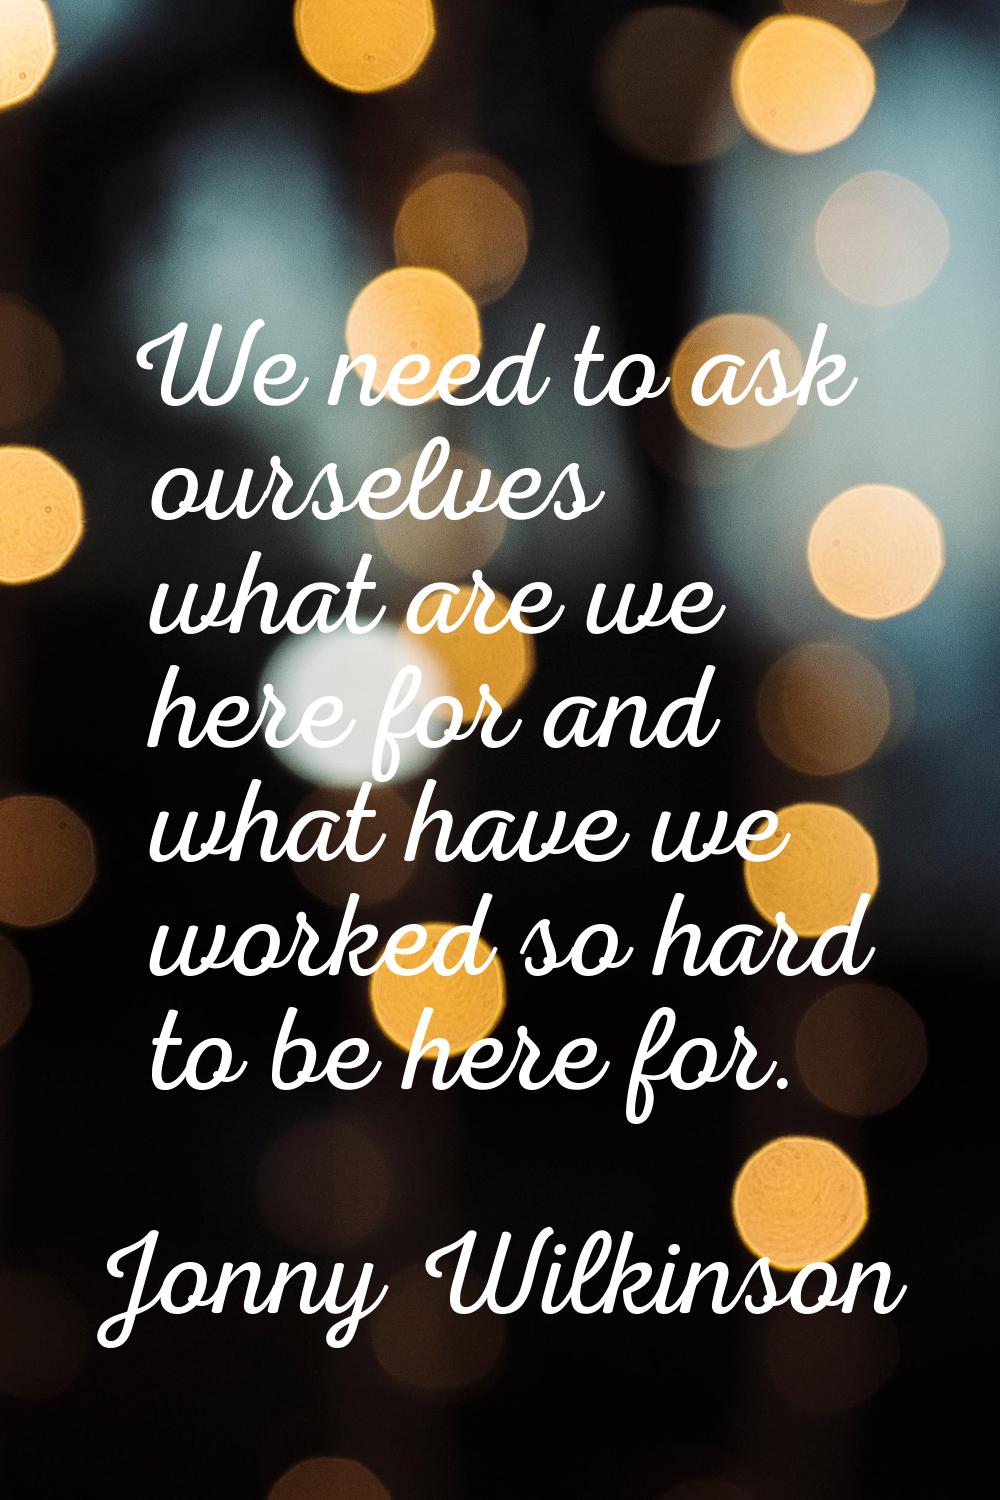 We need to ask ourselves what are we here for and what have we worked so hard to be here for.